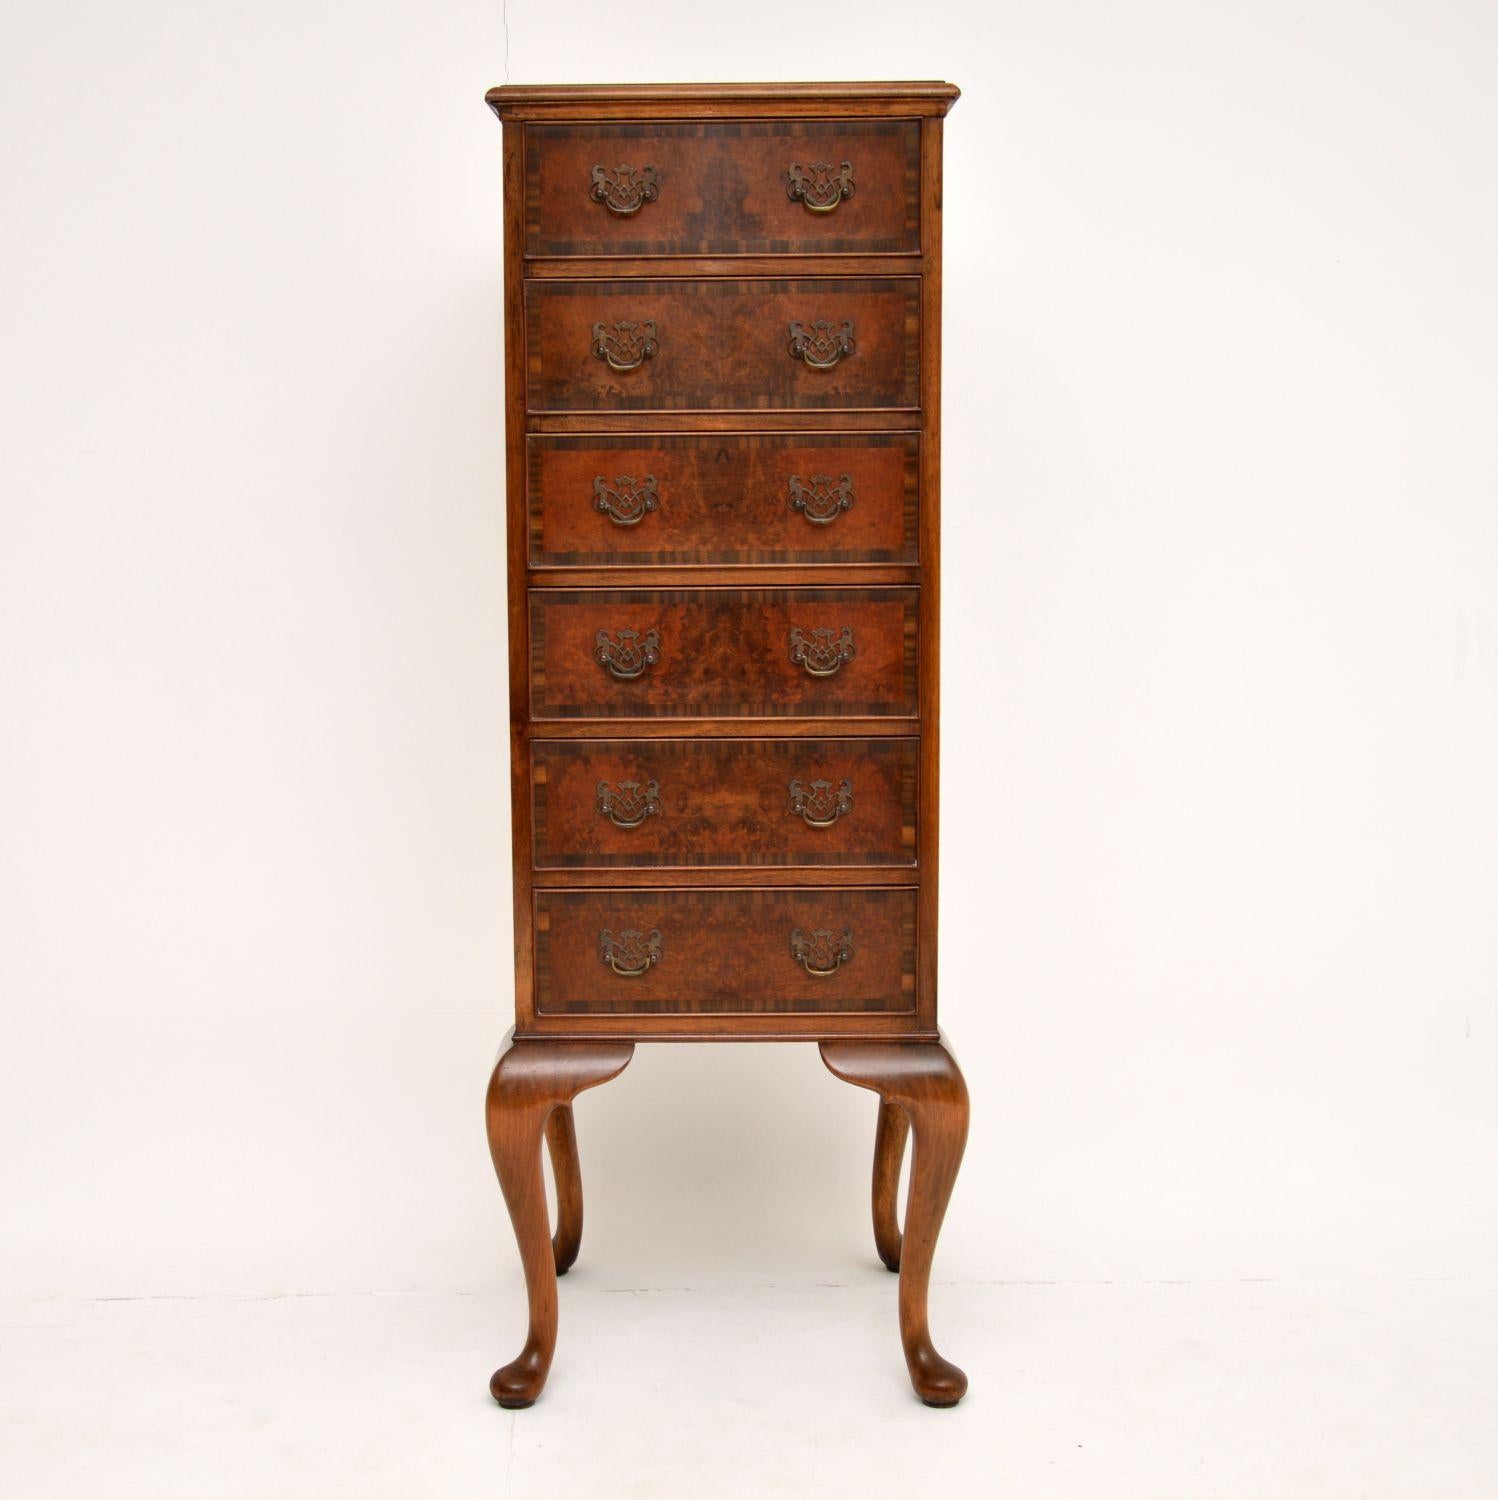 A beautiful antique tall slim chest of drawers in burr walnut, sitting on solid walnut cabriole legs. This dates from circa 1900-1920 period, it is of superb quality and in excellent condition.

We have just had this hand polished to a high